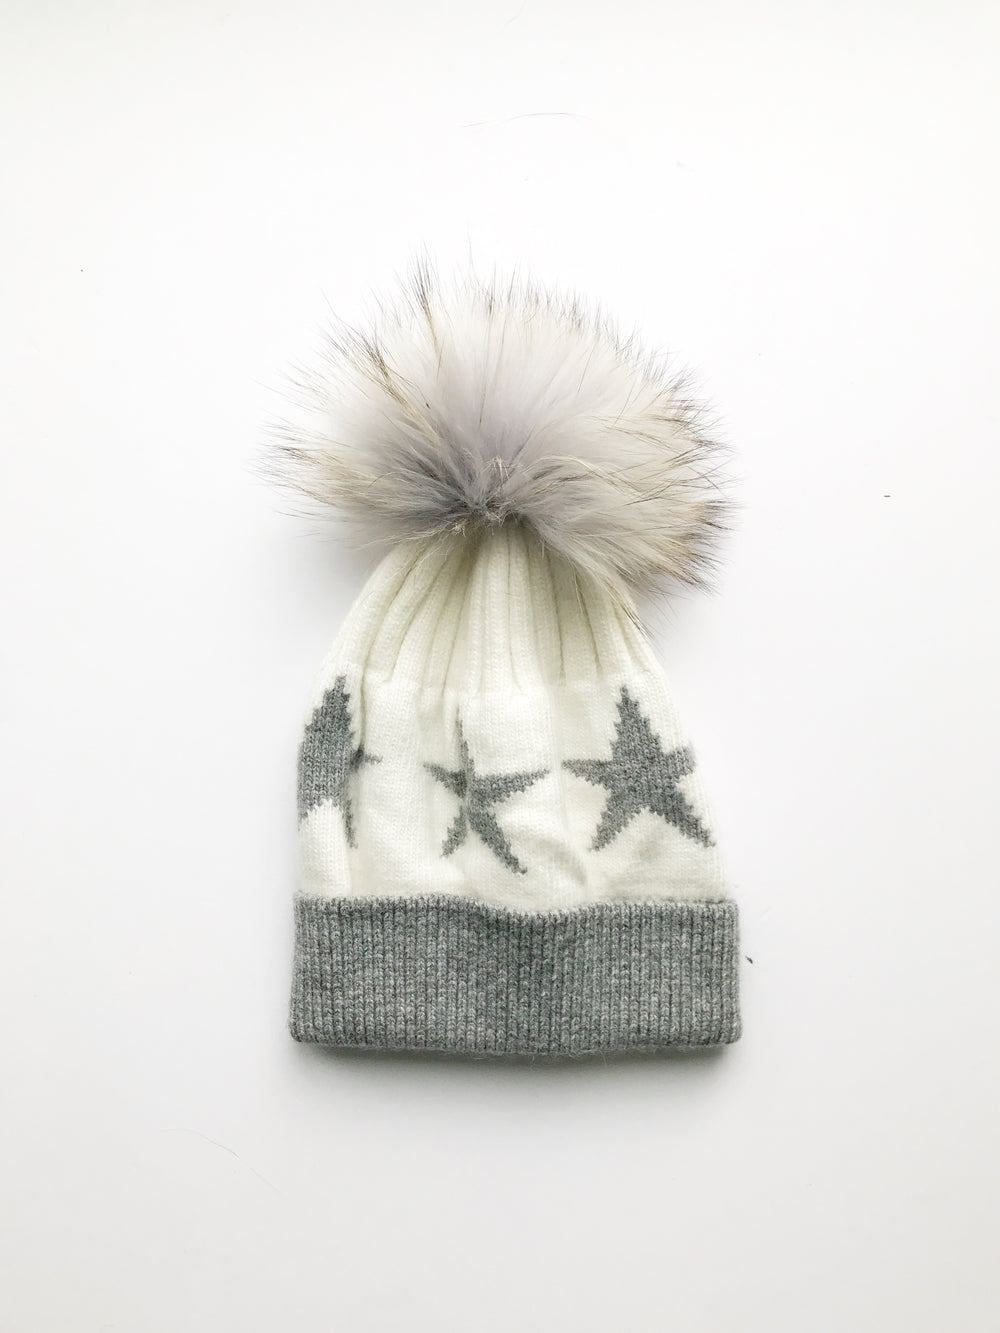 Equation Starry Hat in White with heather gray stars / EQUATION Boutique